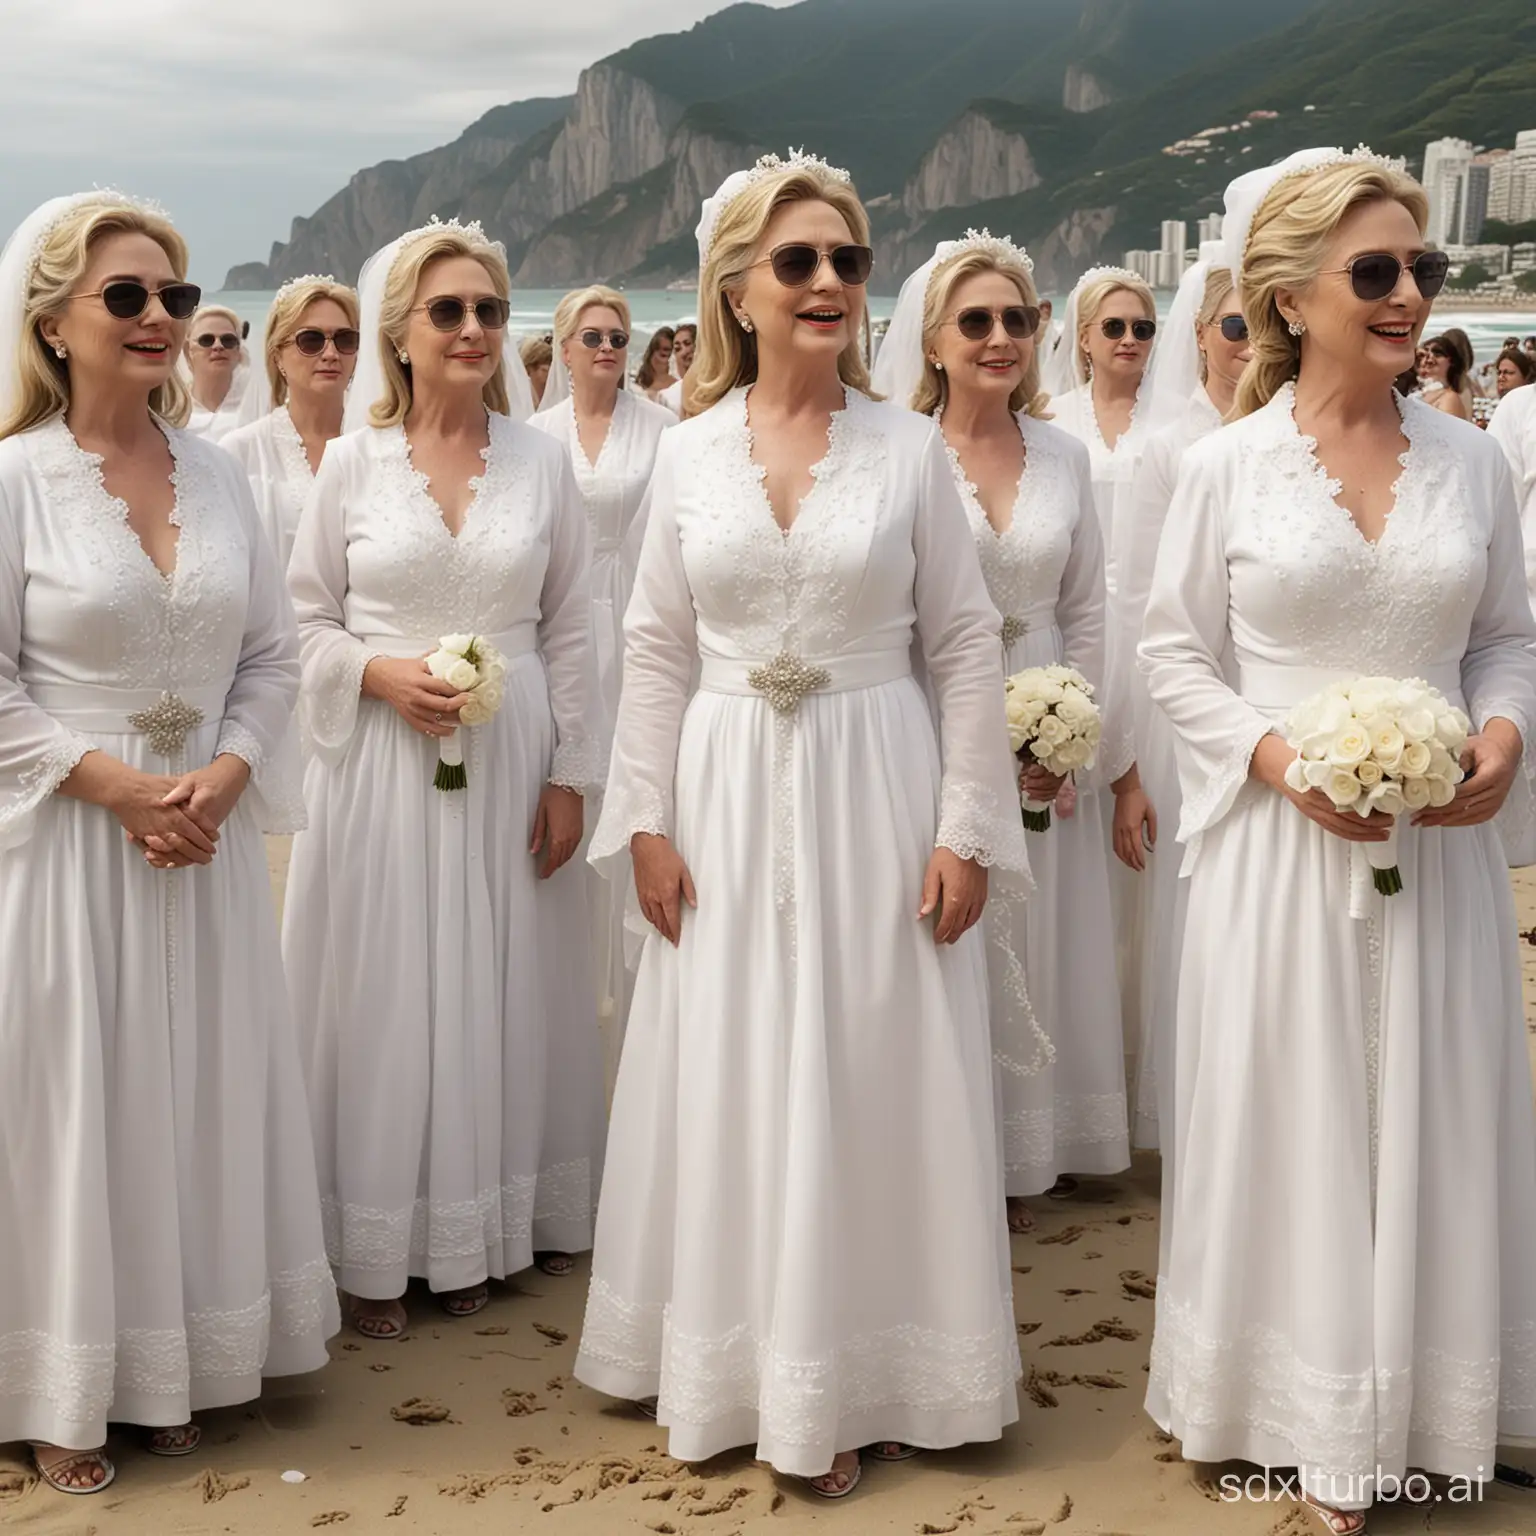 Crowd of Hillary Clinton and her clones dressed as brides discussing together on Copacabana beach and people looking